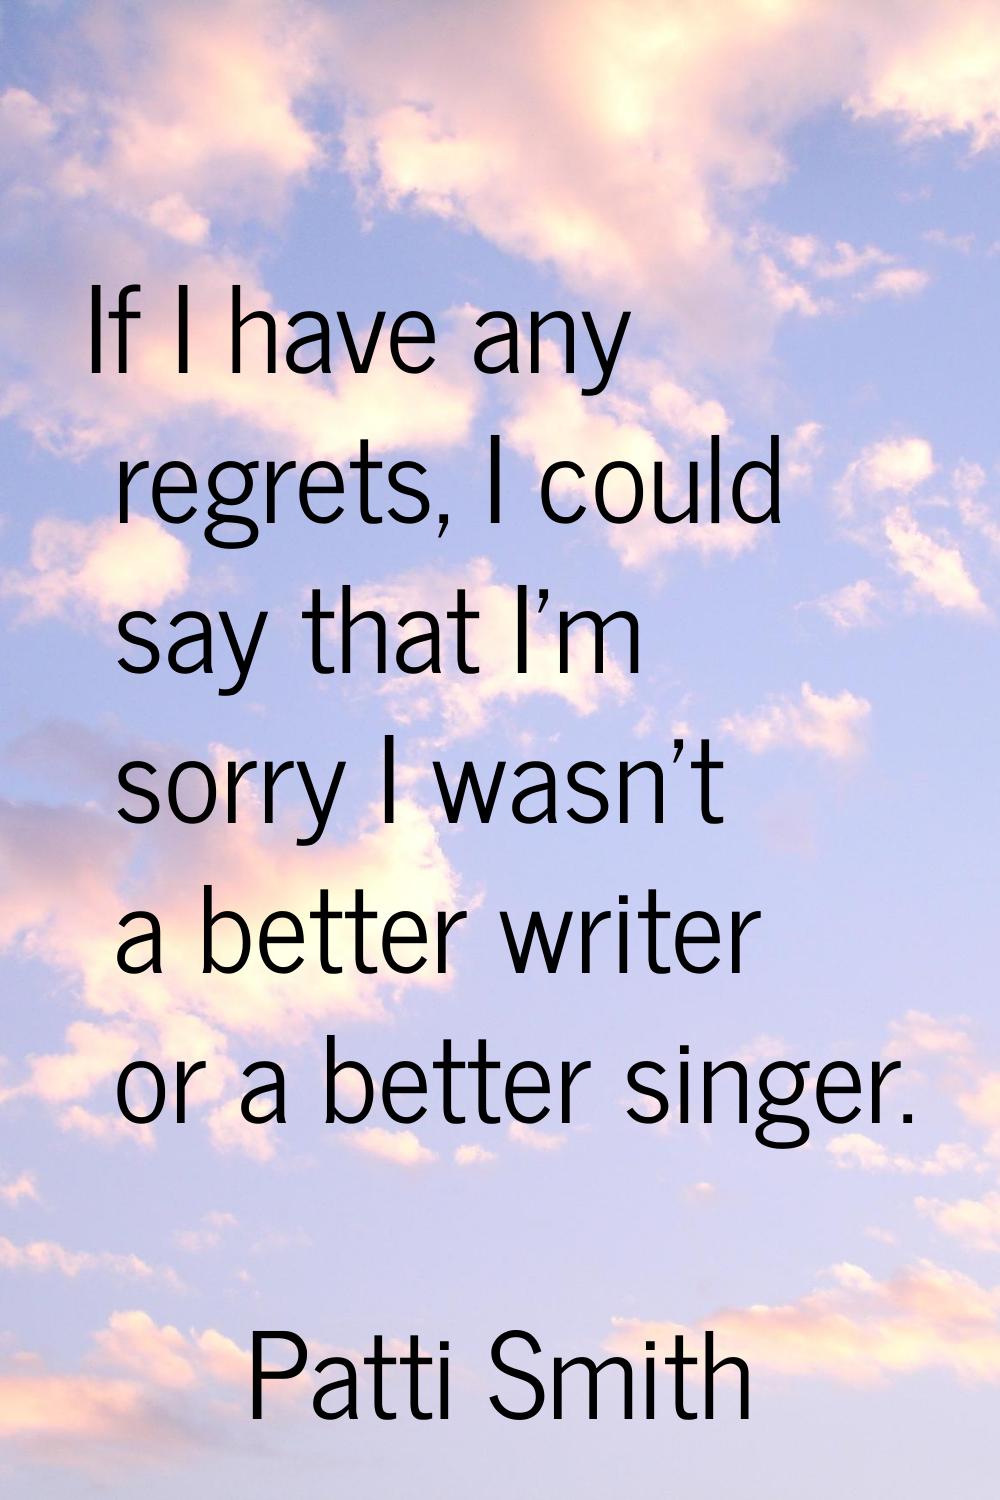 If I have any regrets, I could say that I'm sorry I wasn't a better writer or a better singer.